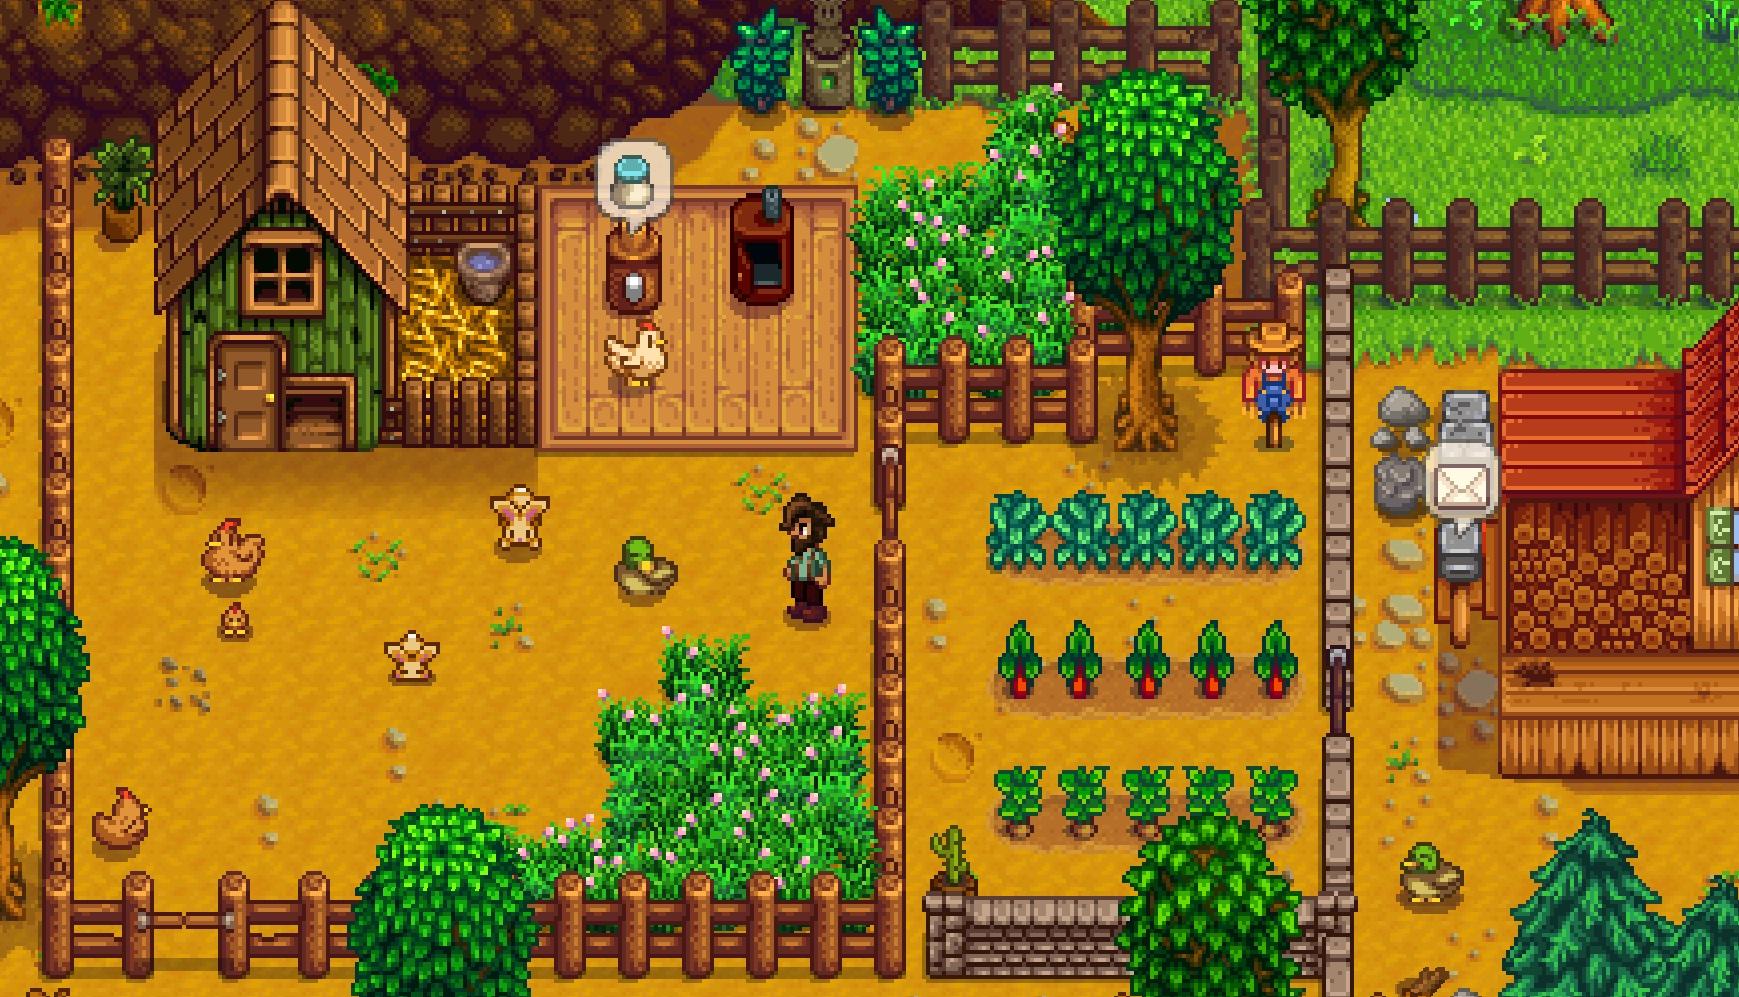 Is 'Stardew Valley' a Cross Platform Game? How to Play With Friends